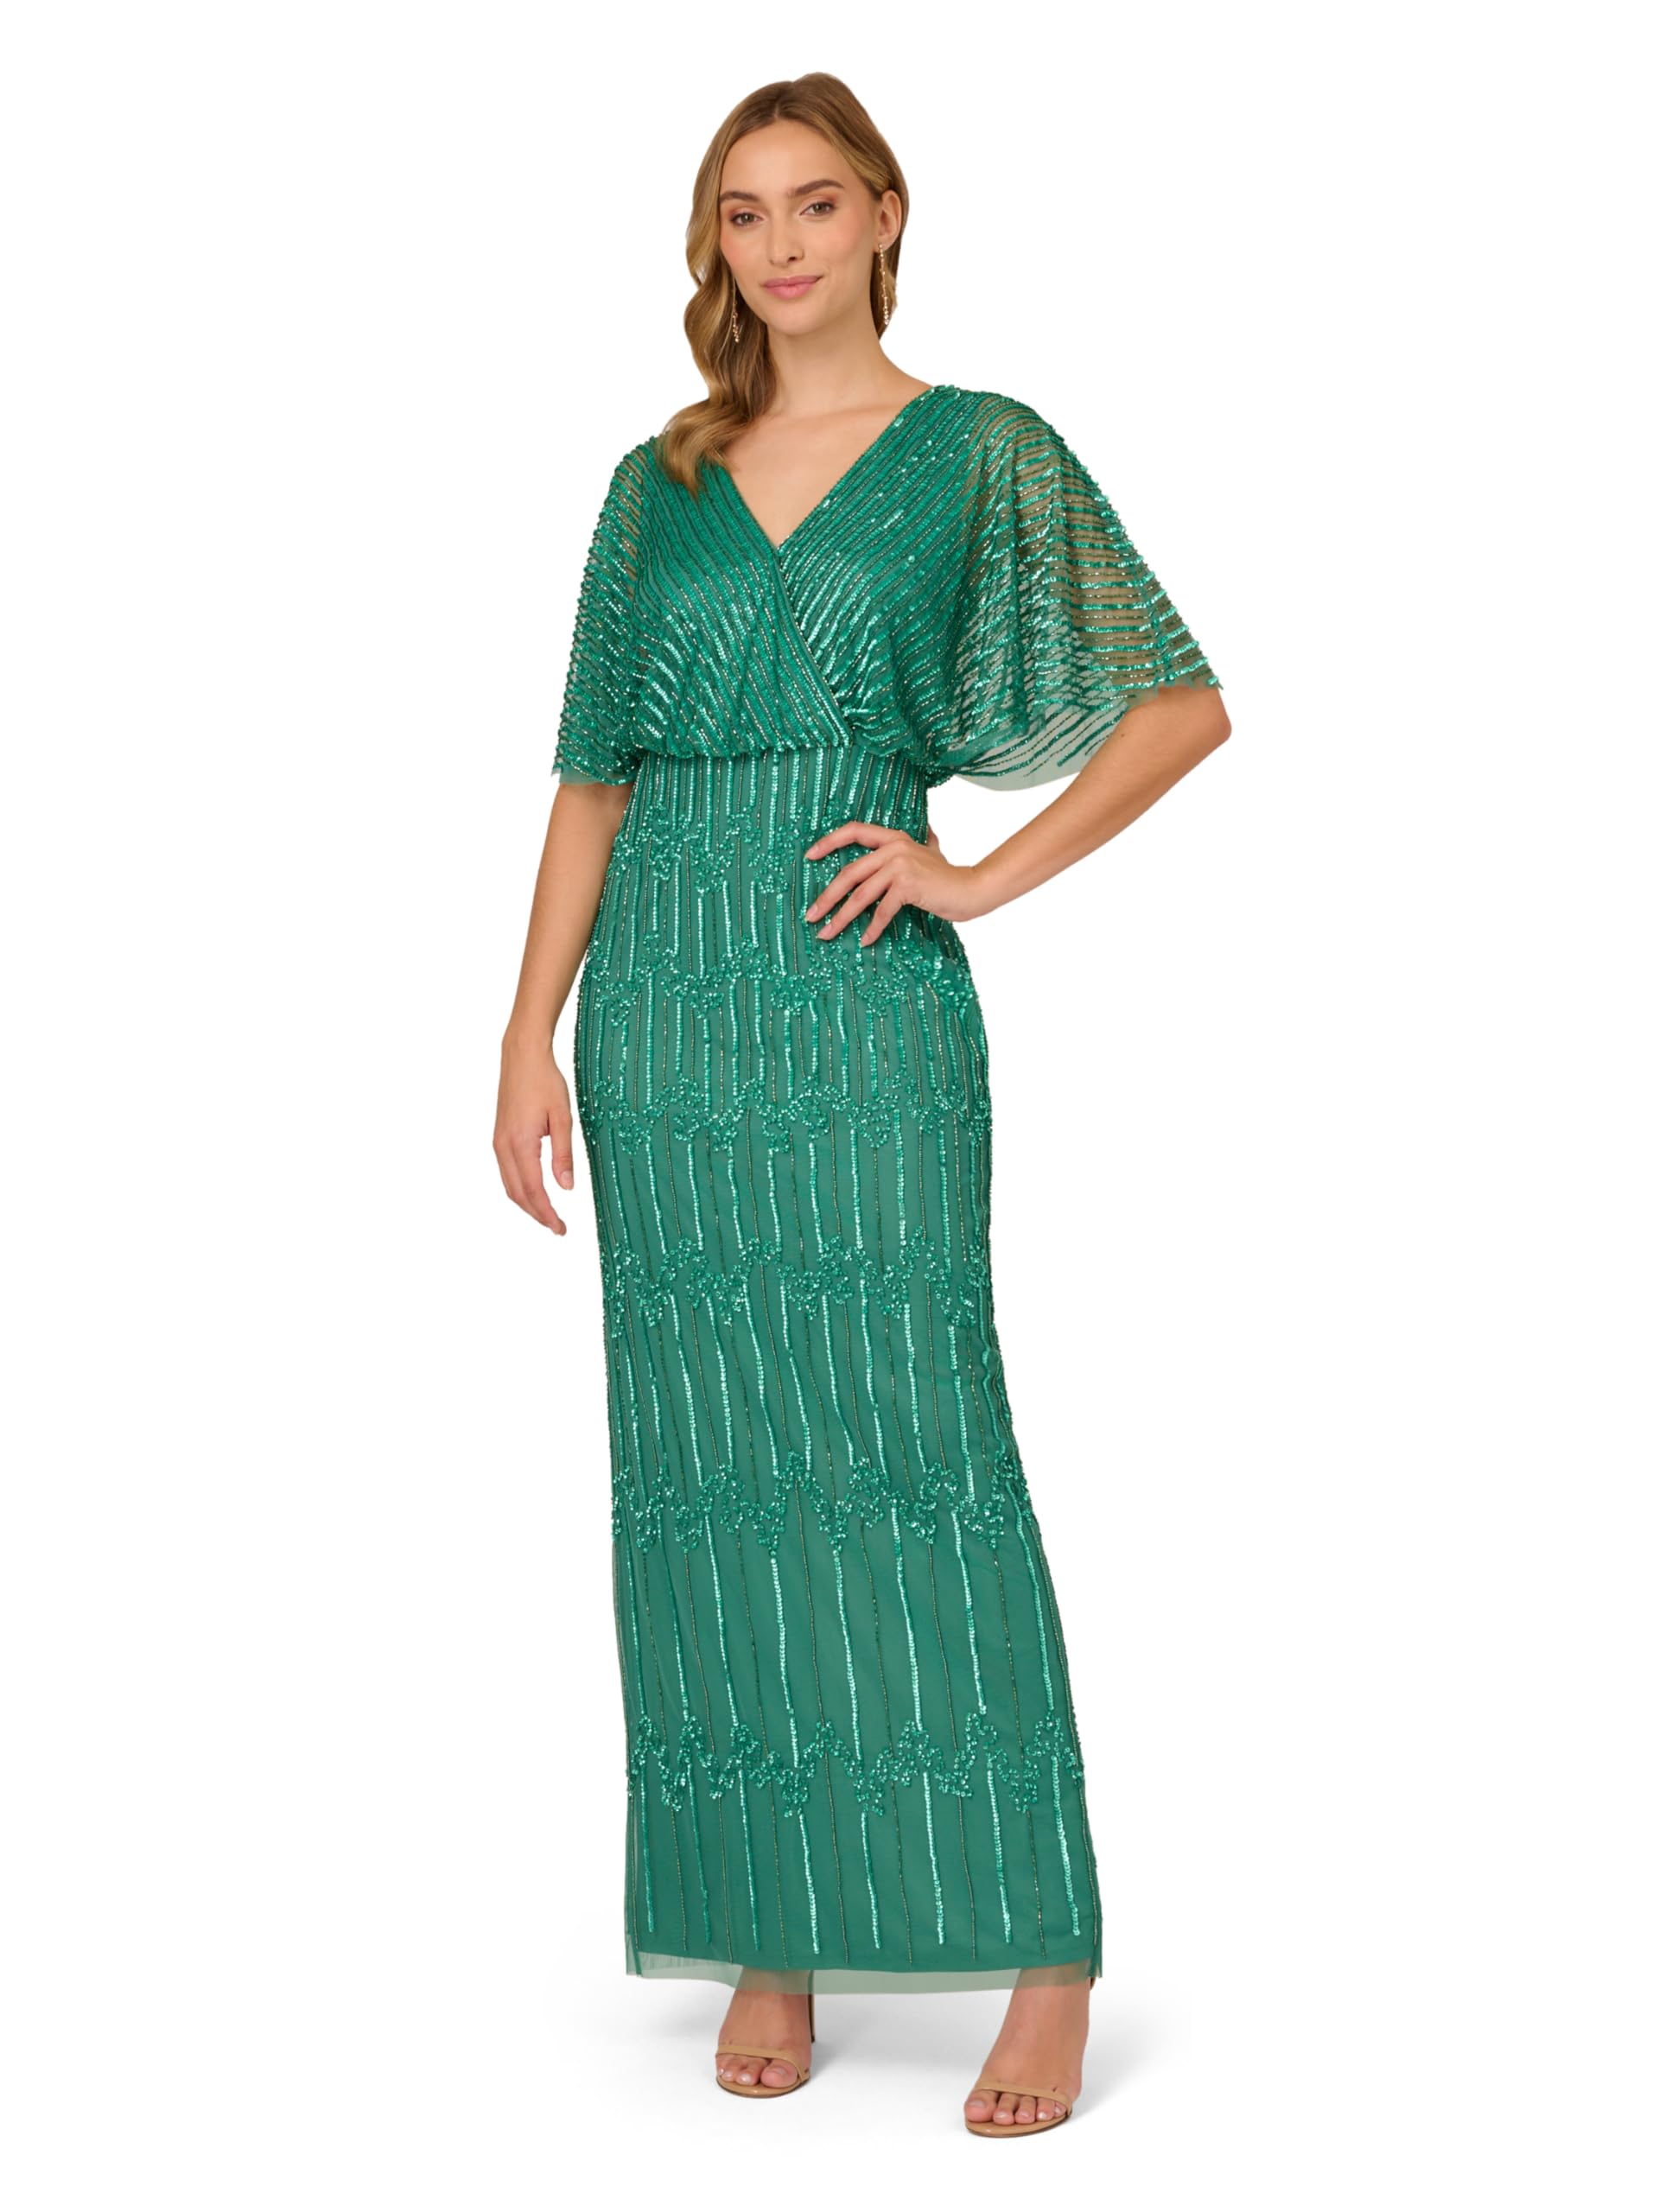 Adrianna Papell Women's Beaded Surplice Gown